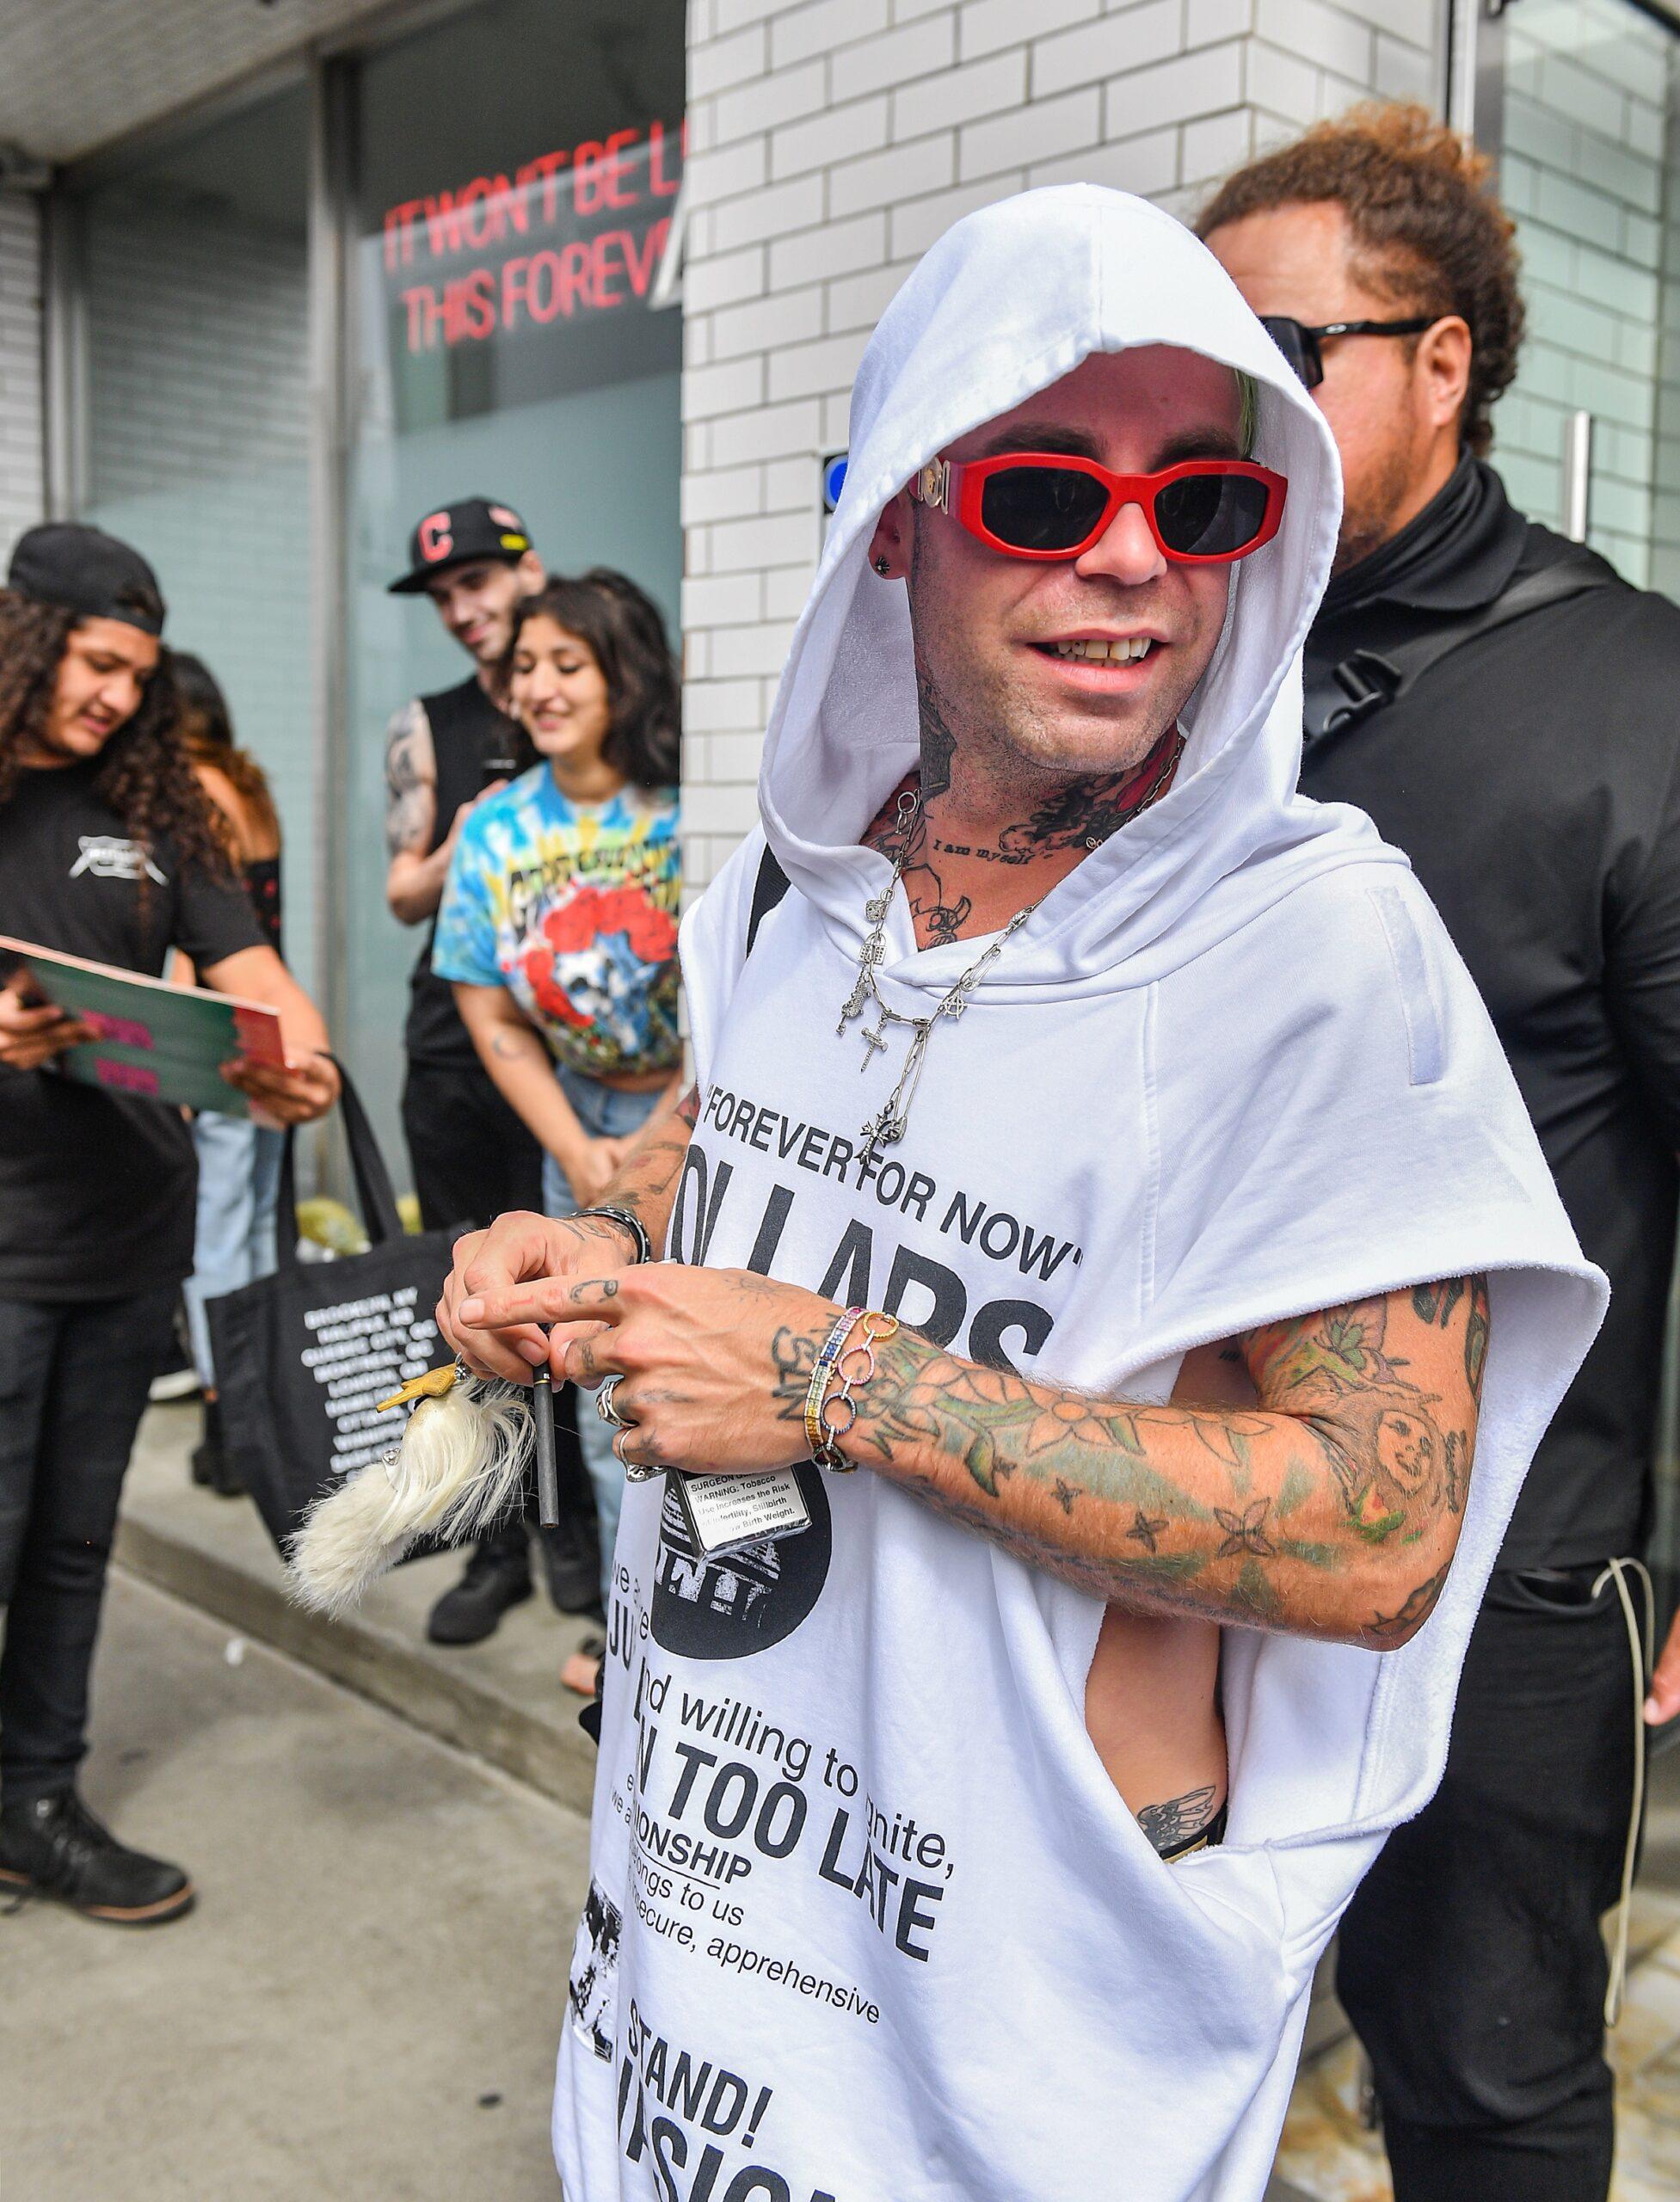 ModSun Attends and Films Machine Gun Kelly amp Travis Barker apos s rooftop performance in Venice Beach CA Over The Weekend